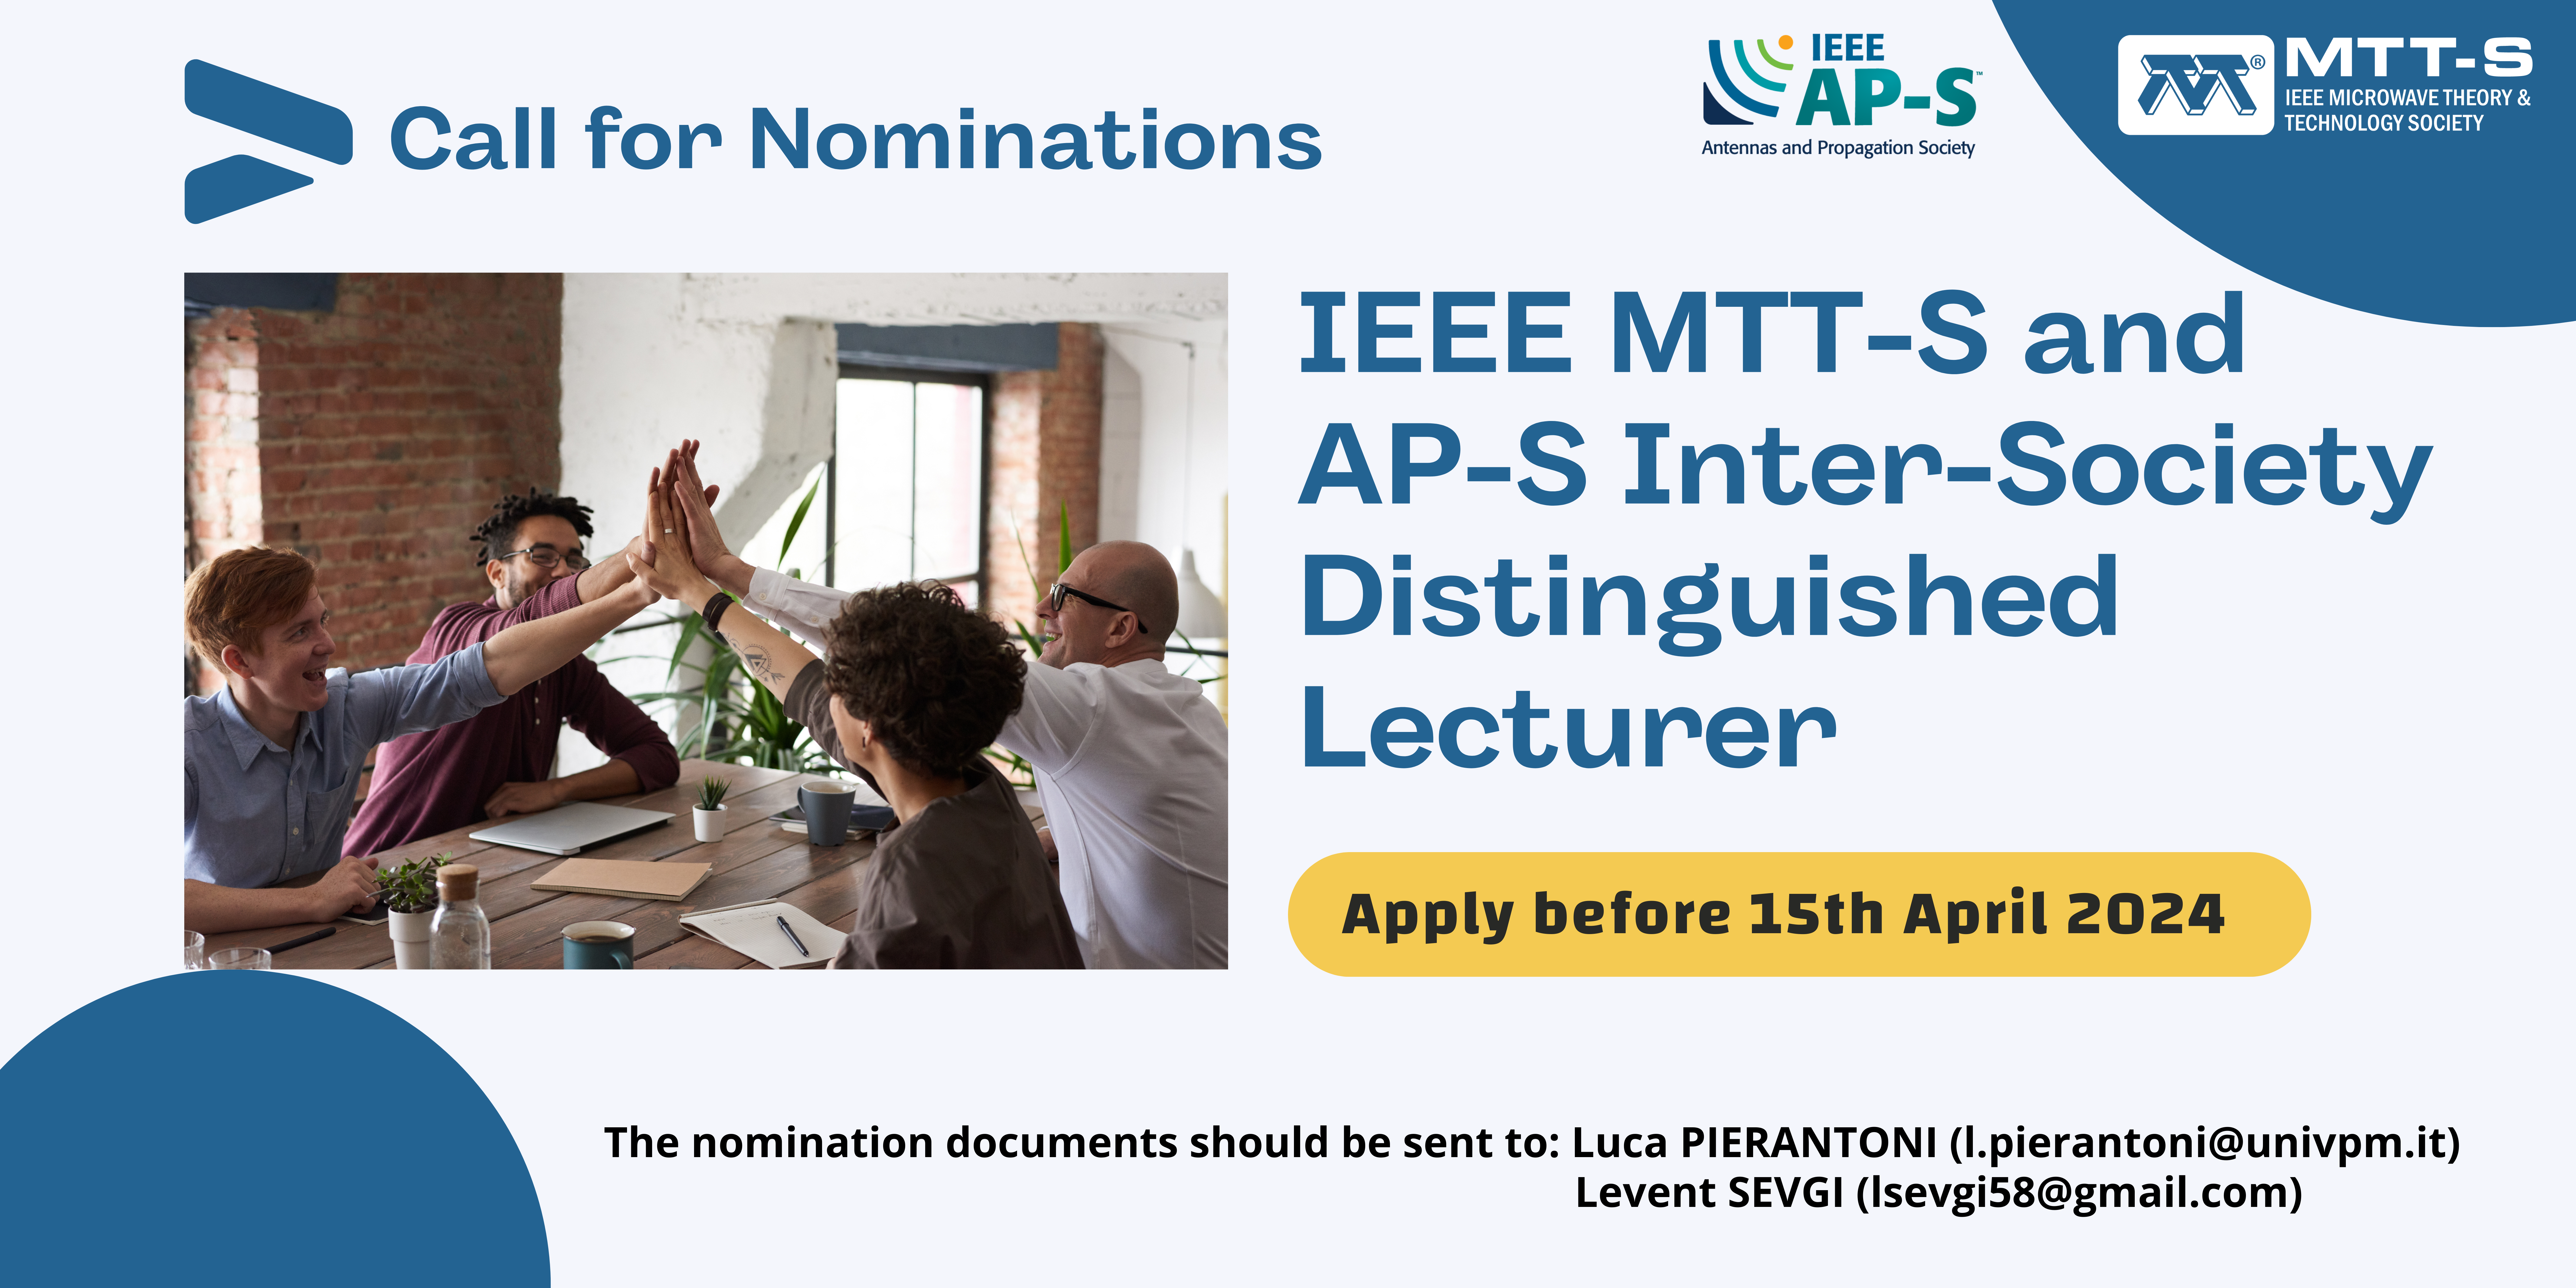 IEEE MTT-S and AP-S Inter-Society Distinguished Lecturer Nomination